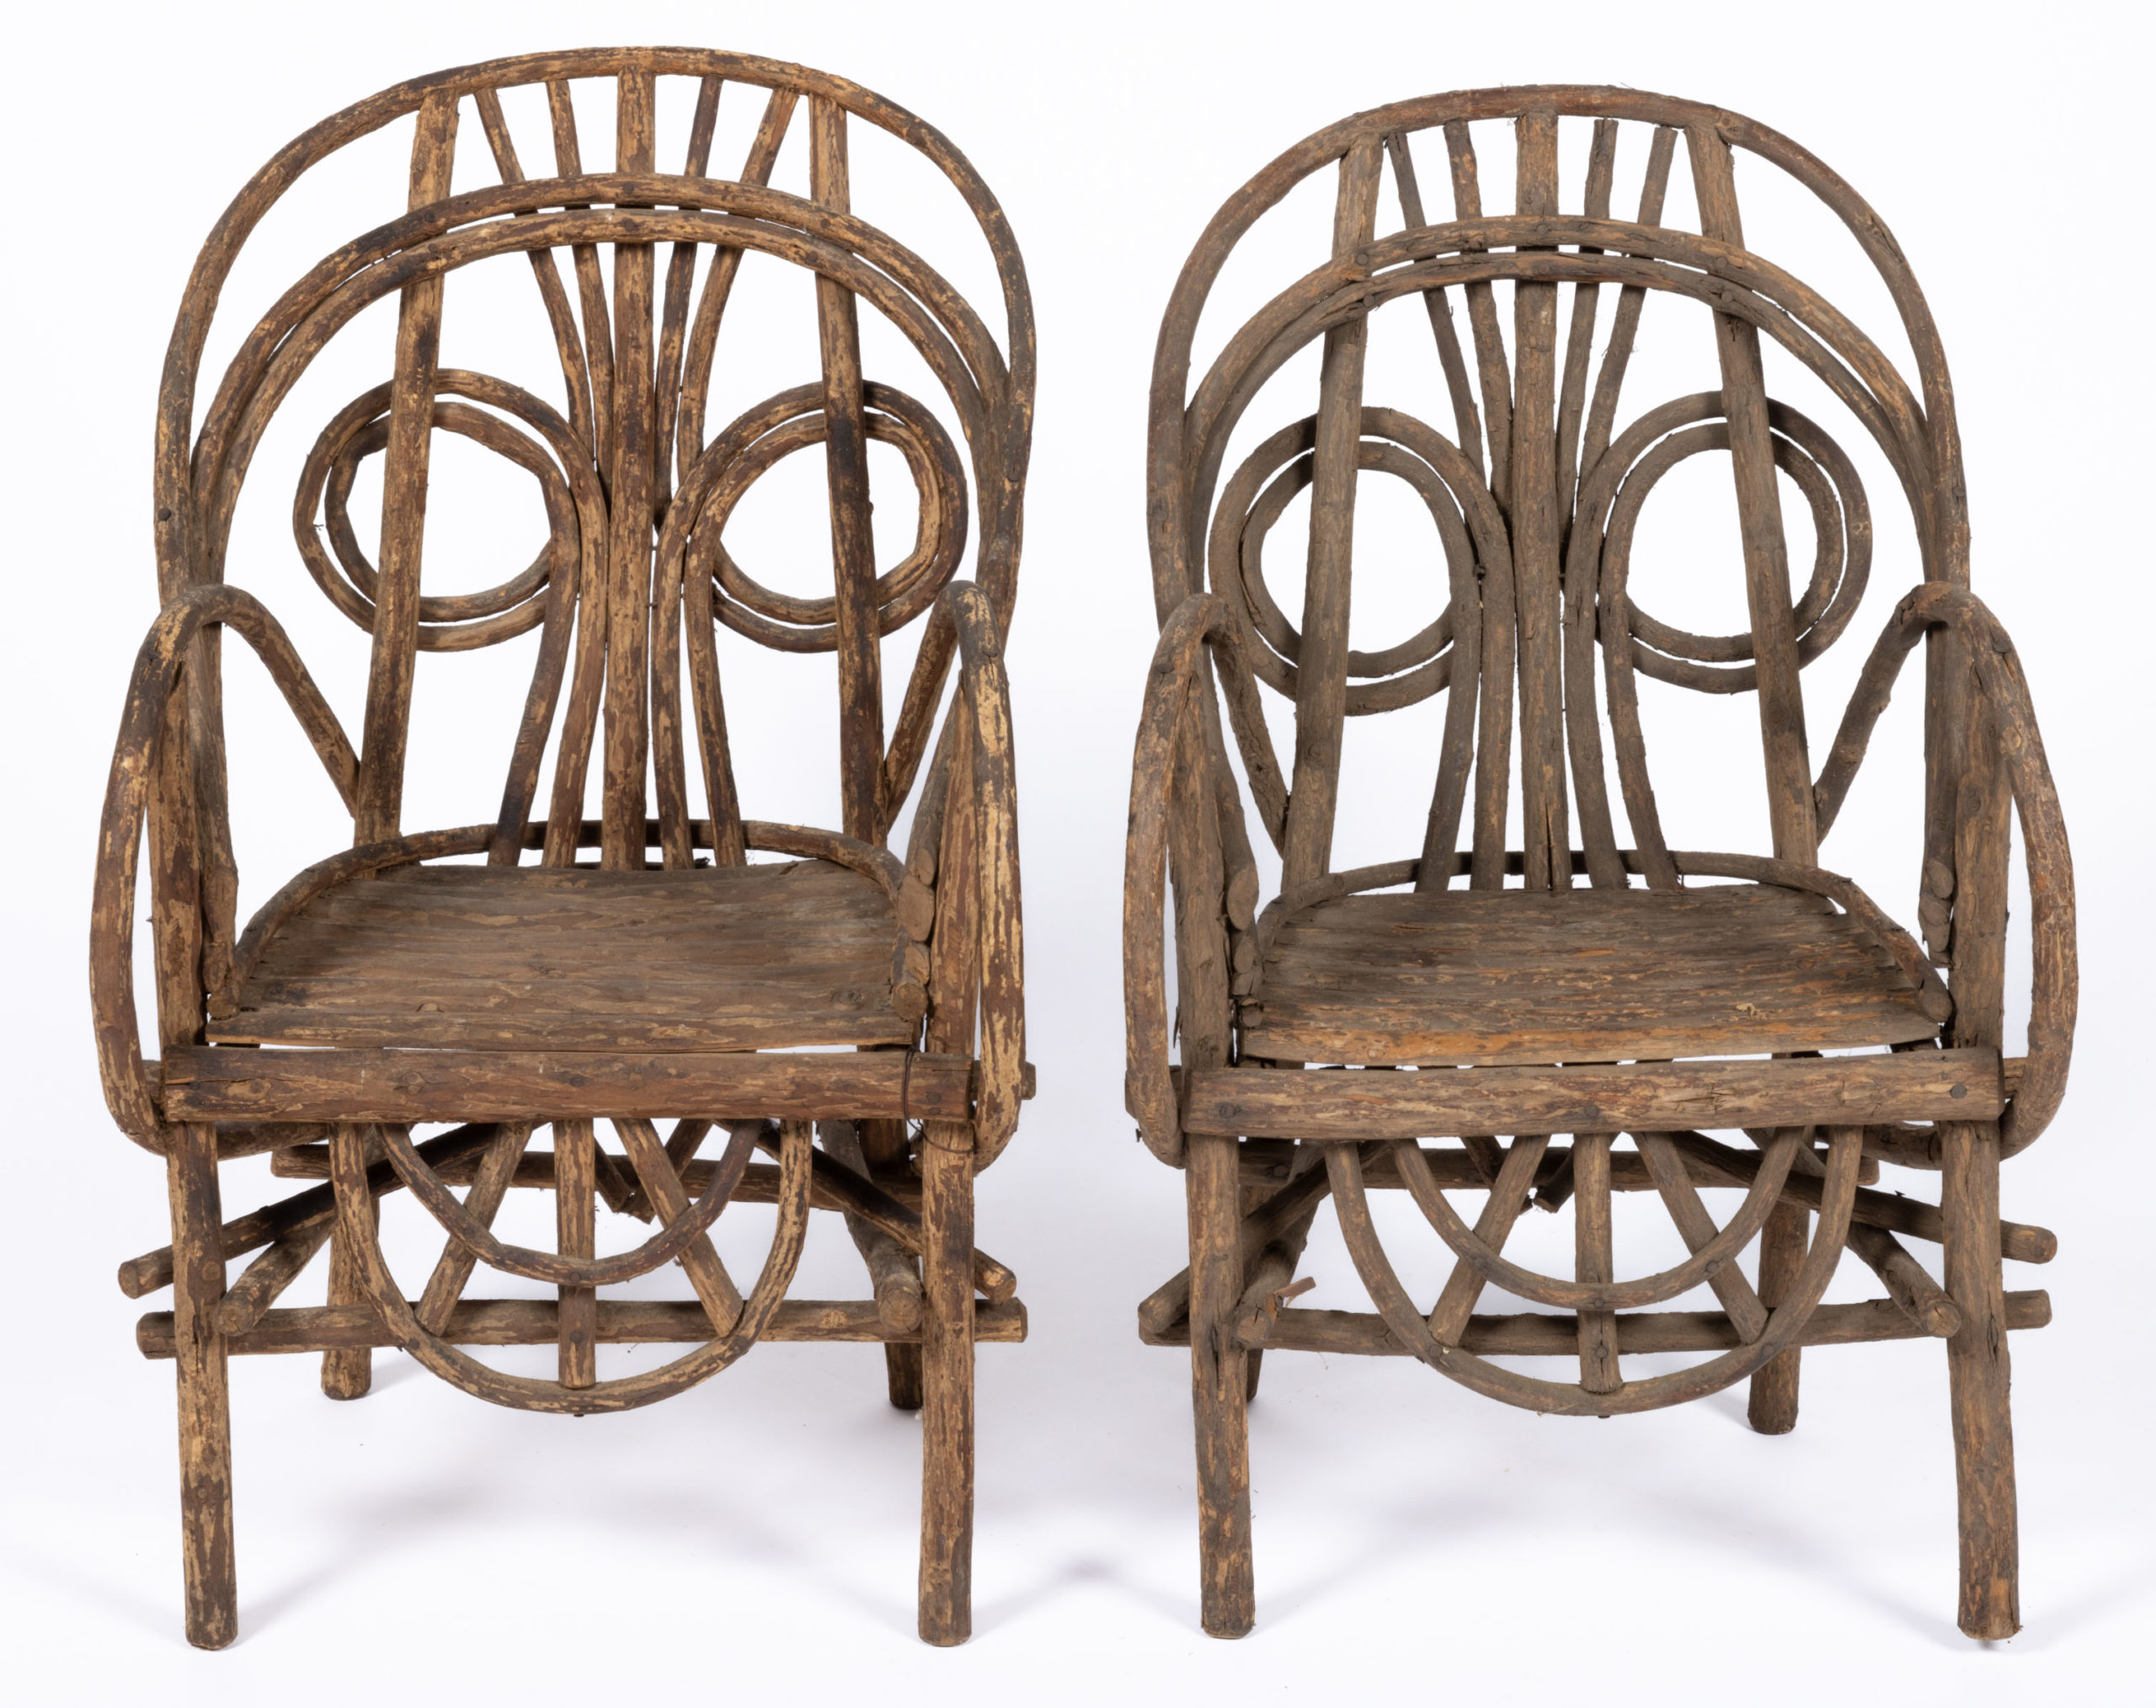 AMERICAN RUSTIC TWIG-STYLE CHILD’S CHAIRS, LOT OF THREE,